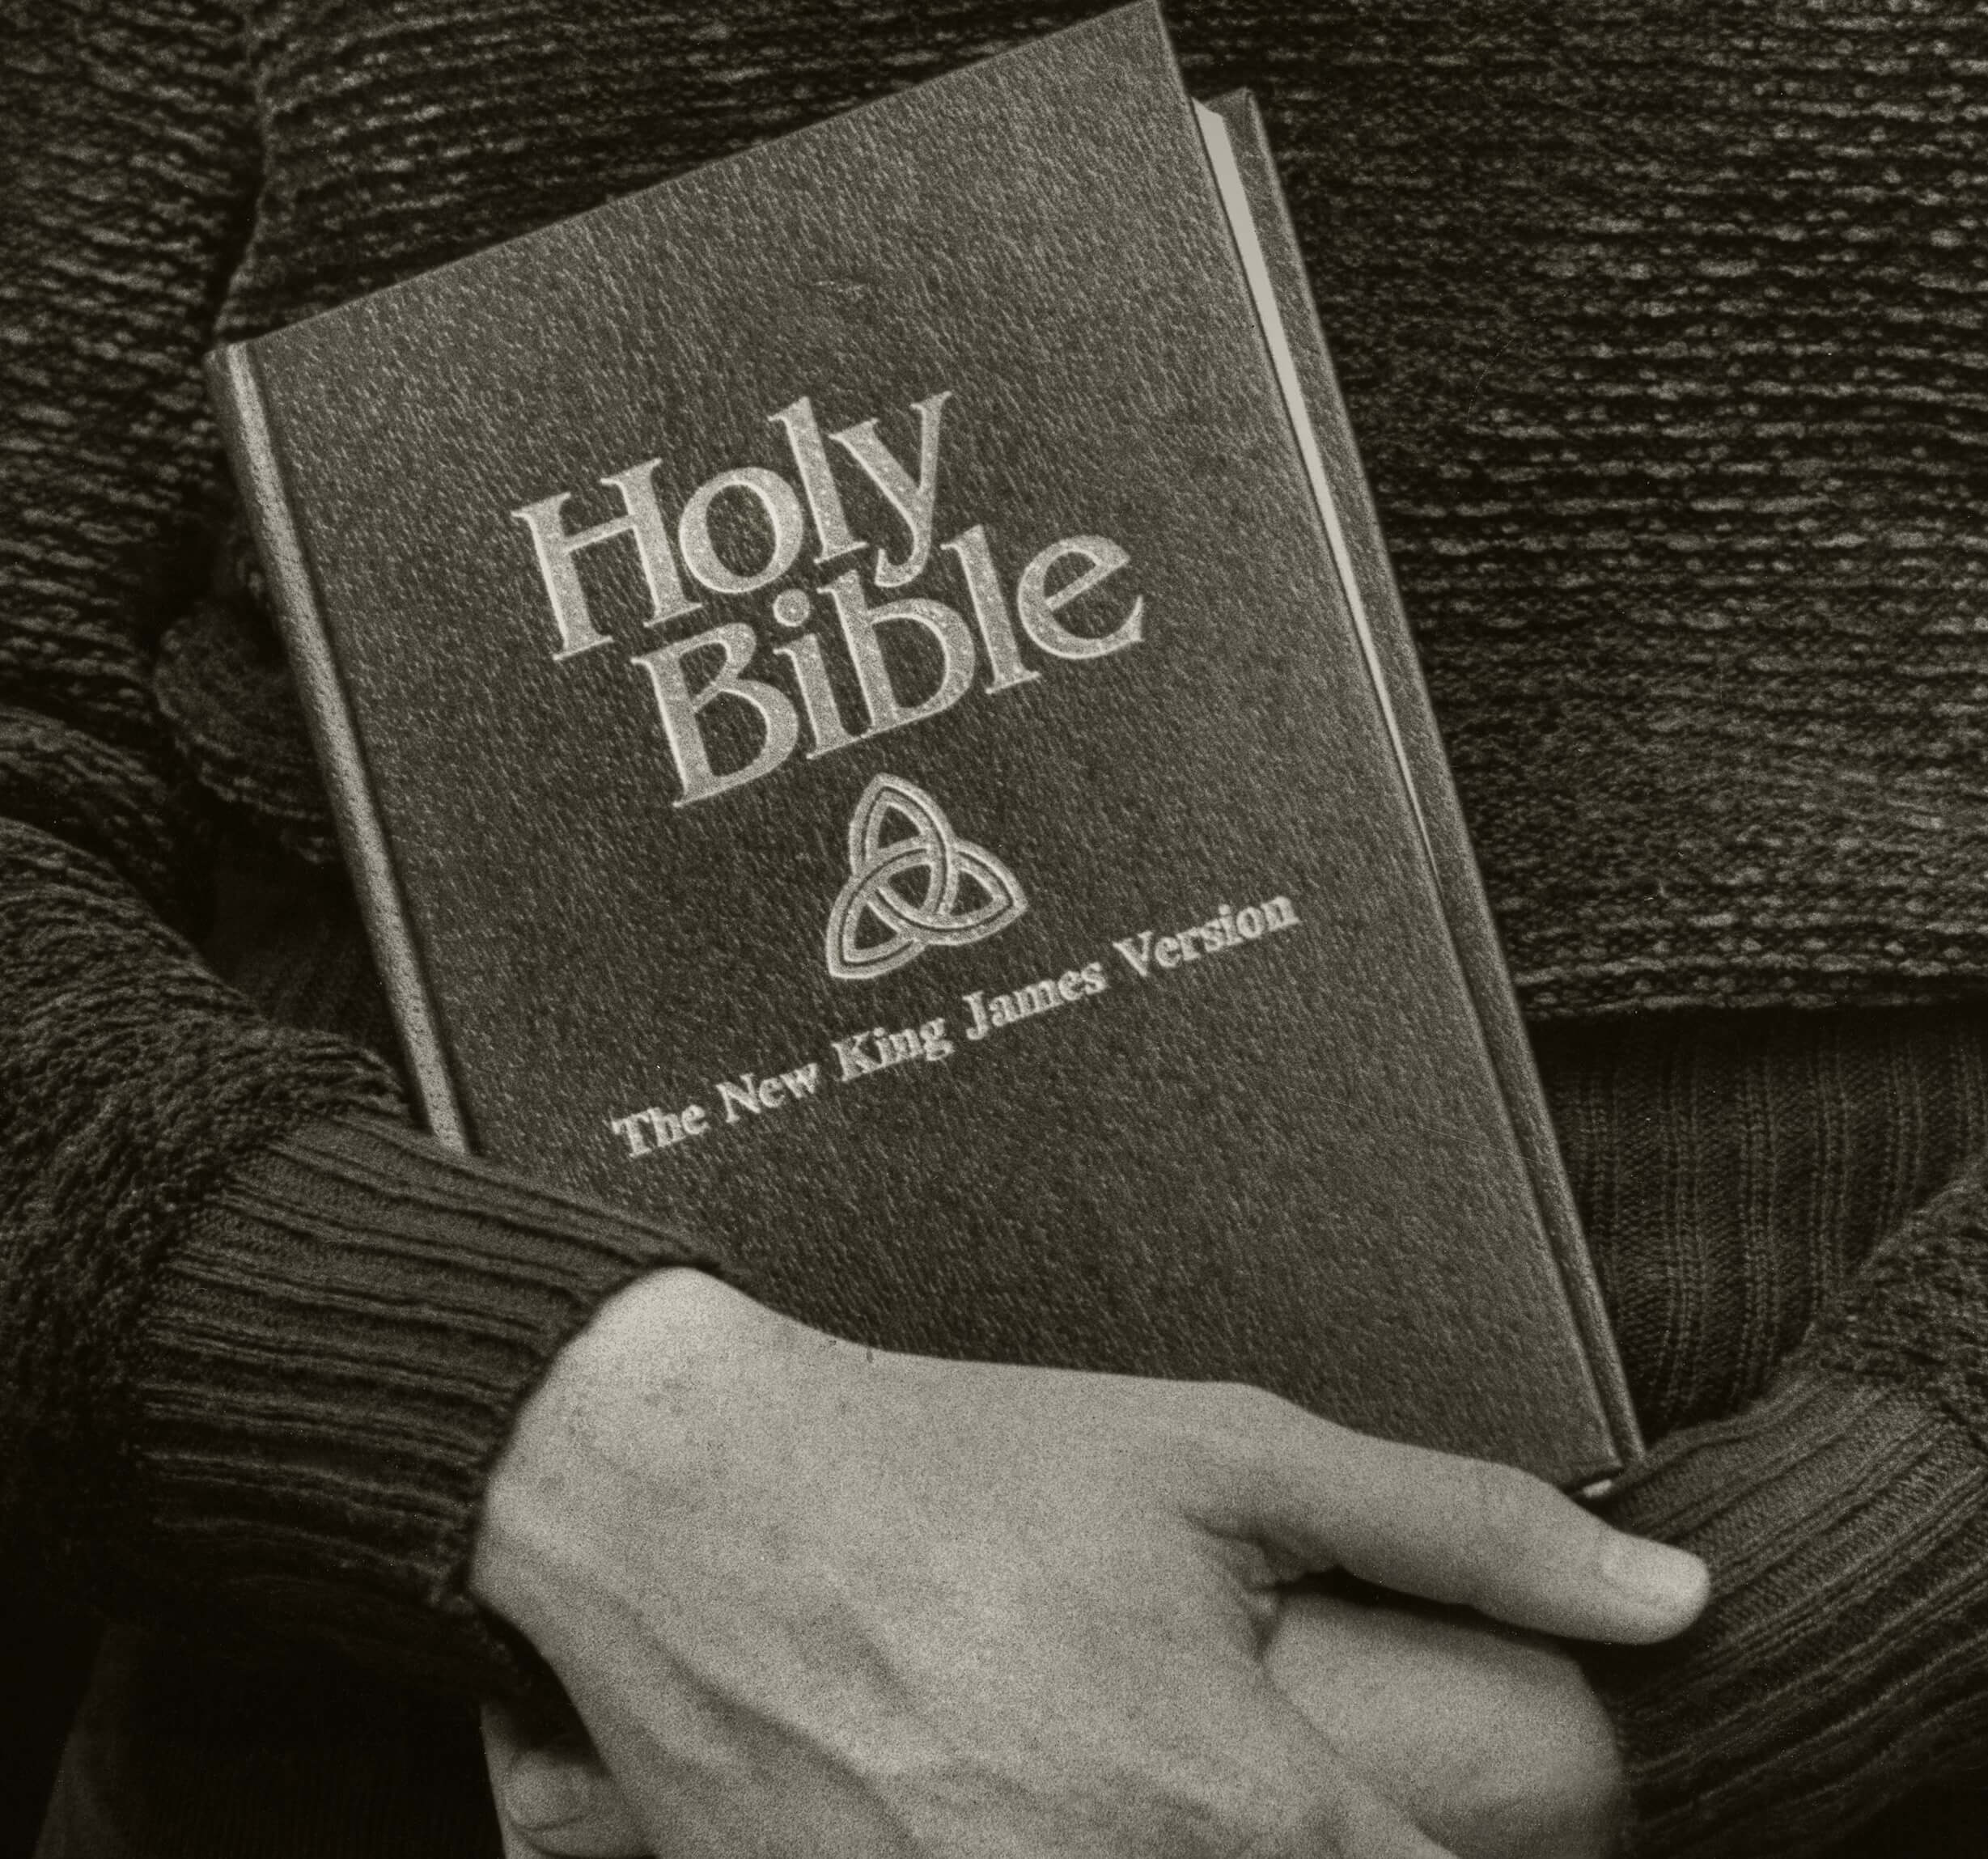 A copy of the Bible, a book that inspired several classic rock songs, in black-and-white